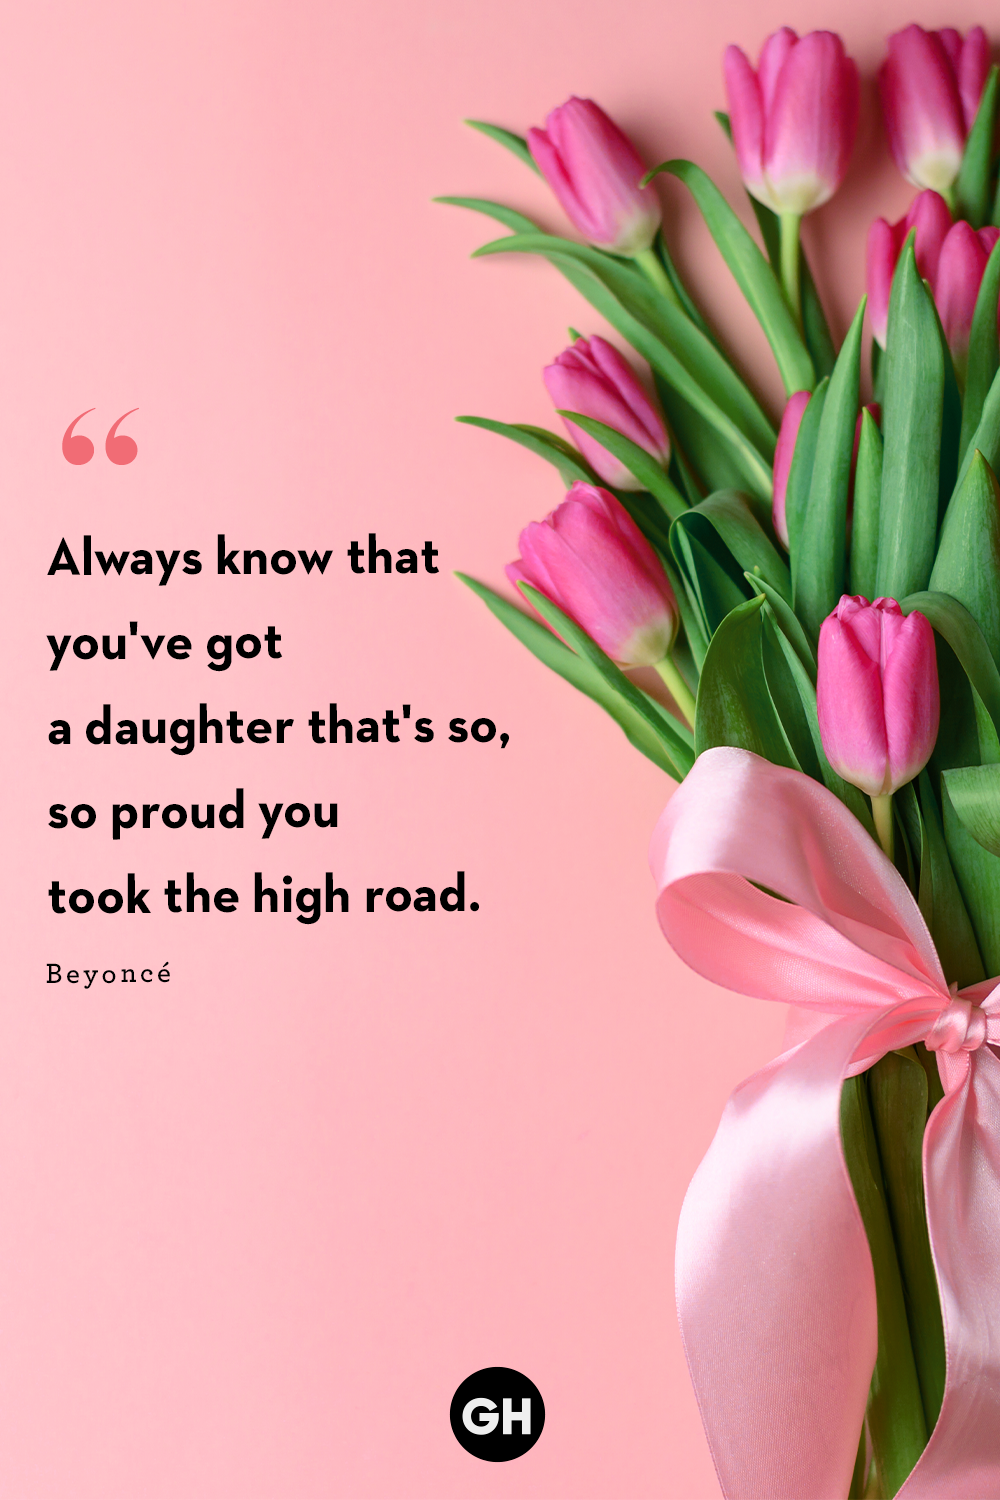 92 Best Mother's Day Captions - Instagram Captions Moms Will Love